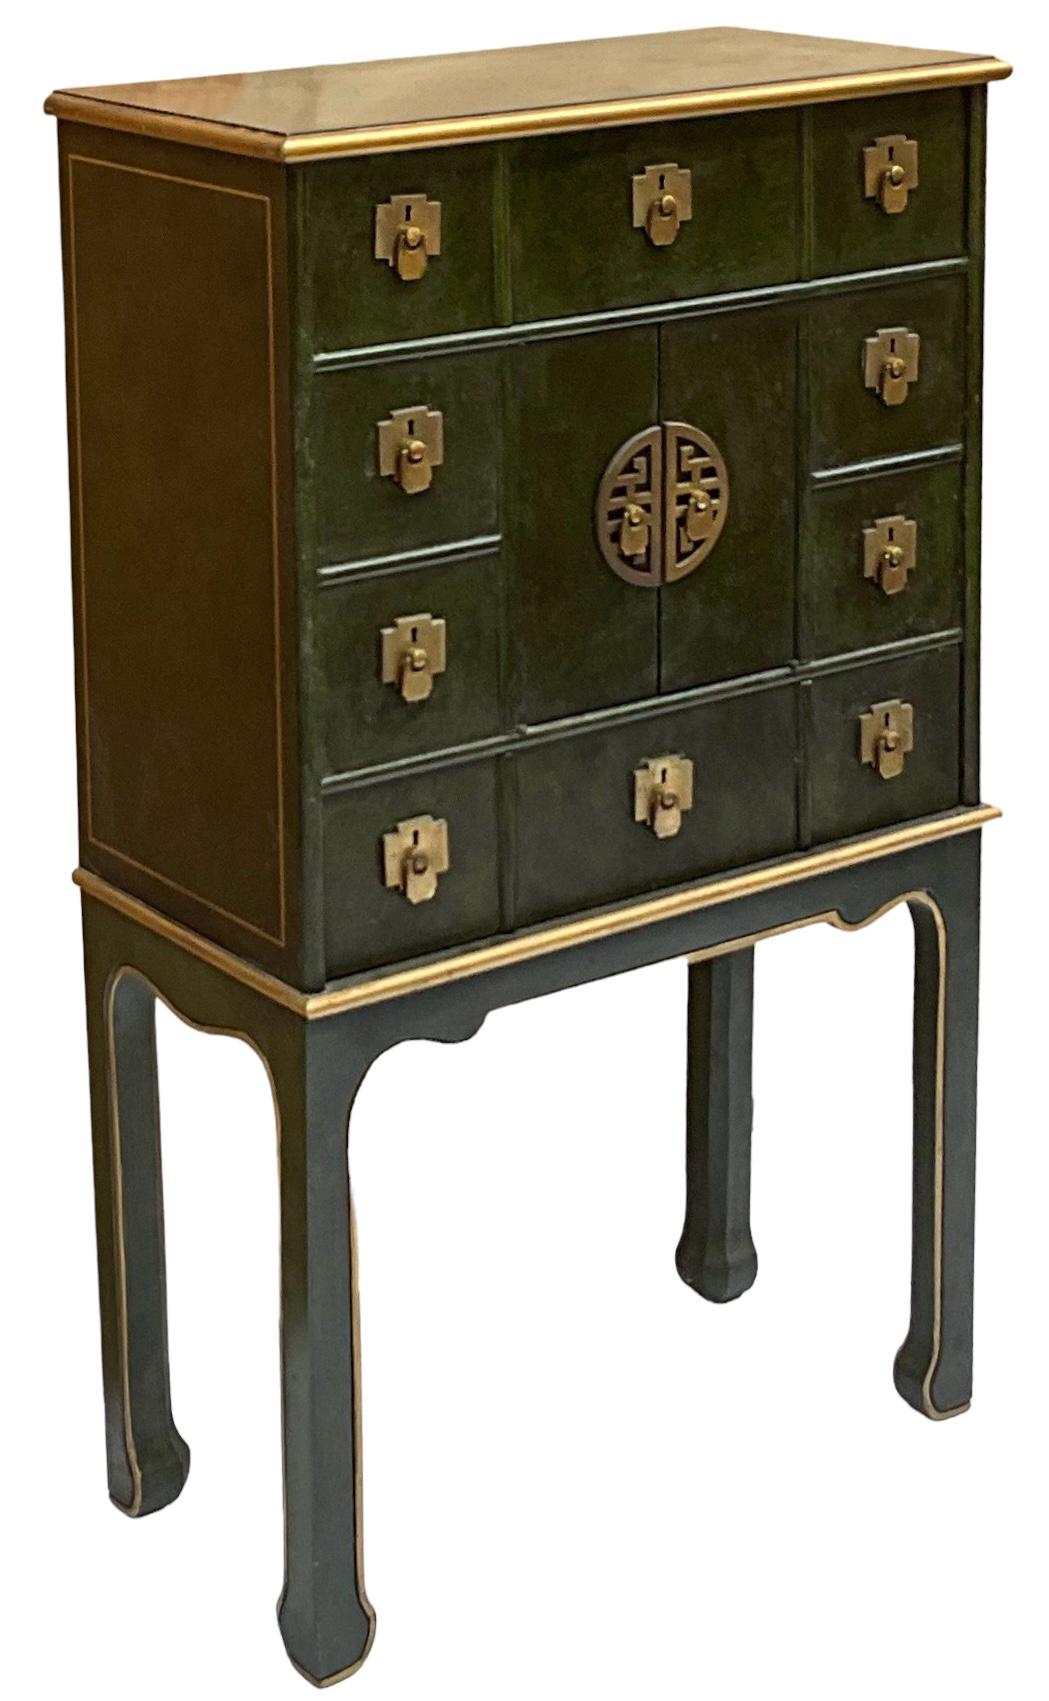 This is a pair of Ming style green and gilt storage cabinets. They are styled to mimic a chest or box on stand. The pair are in very good condition. The cabinets would make great storage for office to lingerie to jewelry. They are unmarked. 